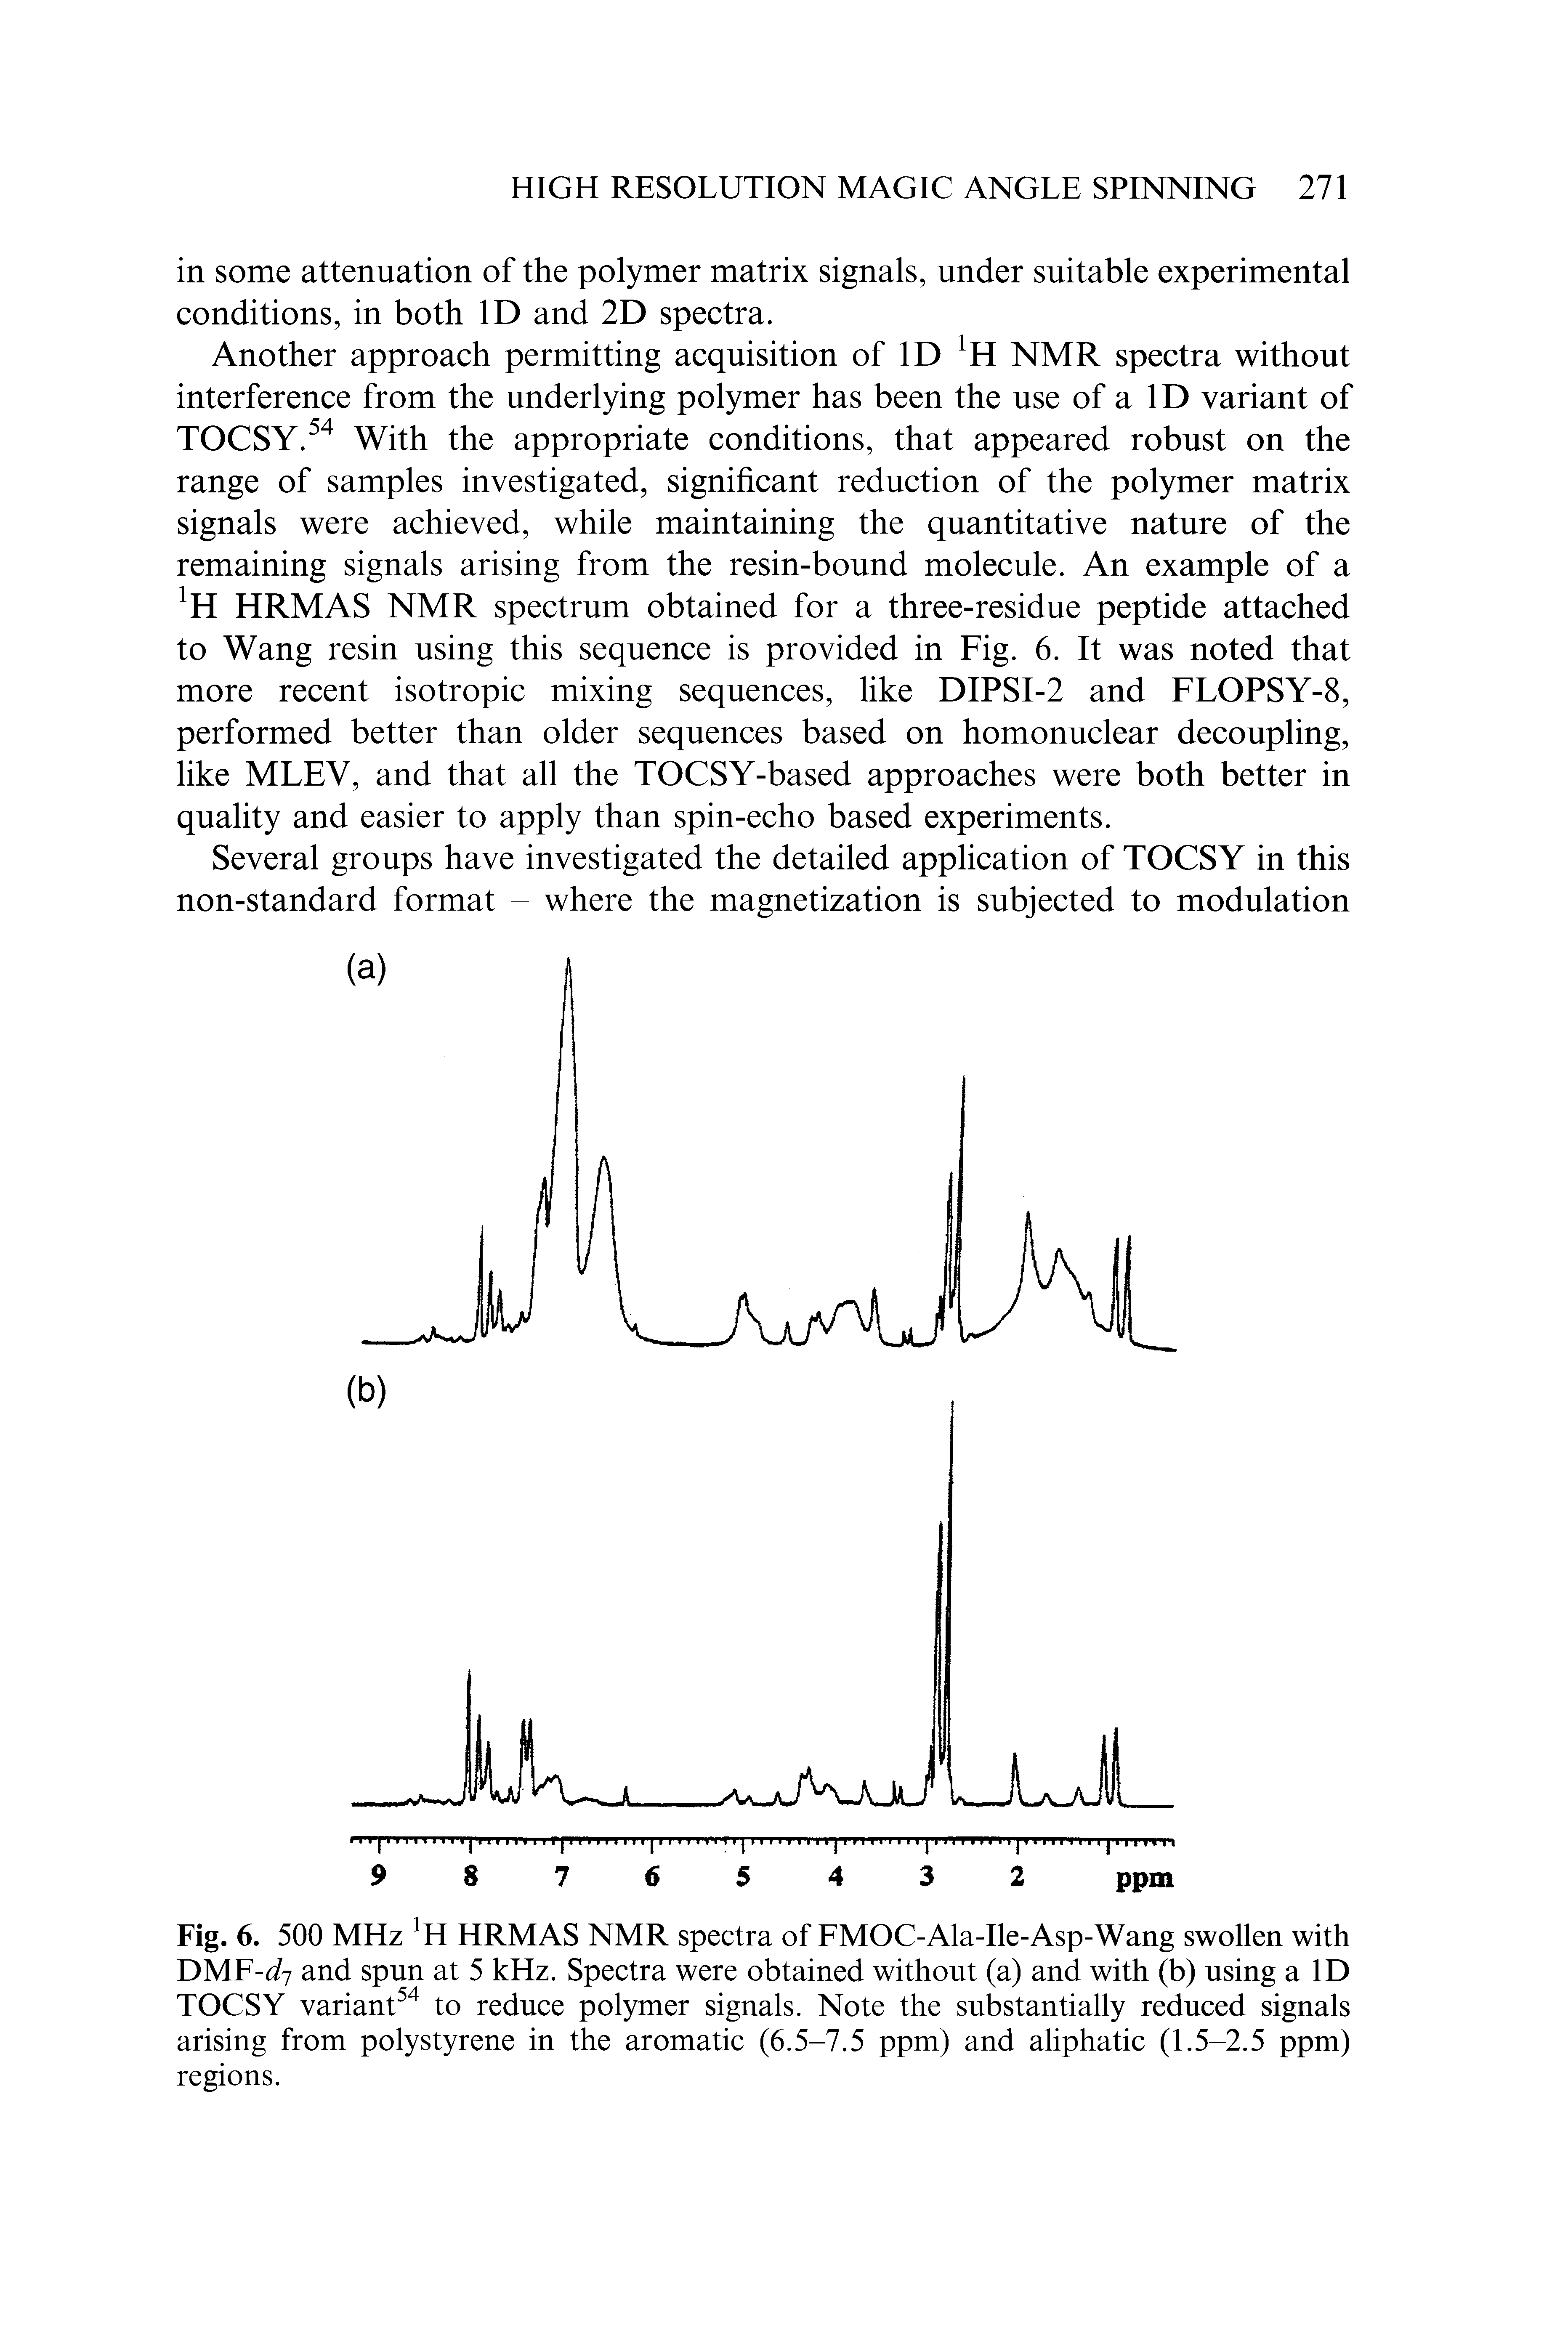 Fig. 6. 500 MHz H HRMAS NMR spectra of FMOC-Ala-Ile-Asp-Wang swollen with DMF- 7 and spun at 5 kHz. Spectra were obtained without (a) and with (b) using a ID TOCSY variant54 to reduce polymer signals. Note the substantially reduced signals arising from polystyrene in the aromatic (6.5-7.5 ppm) and aliphatic (1.5-2.5 ppm) regions.